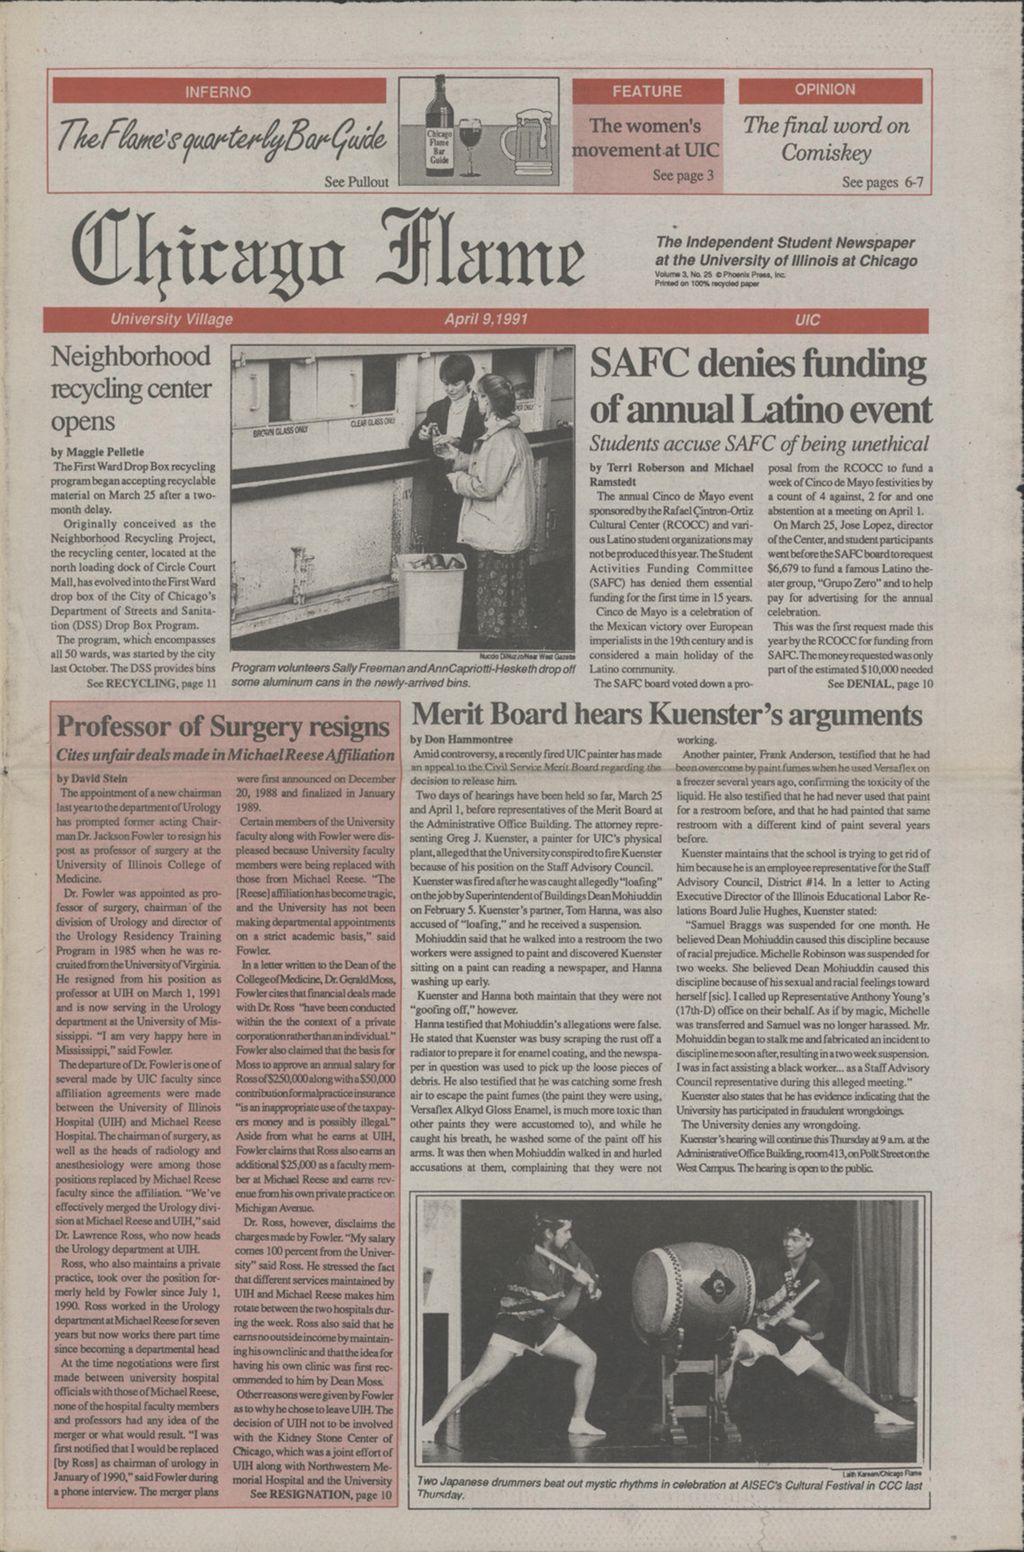 Chicago Flame (April 9, 1991)